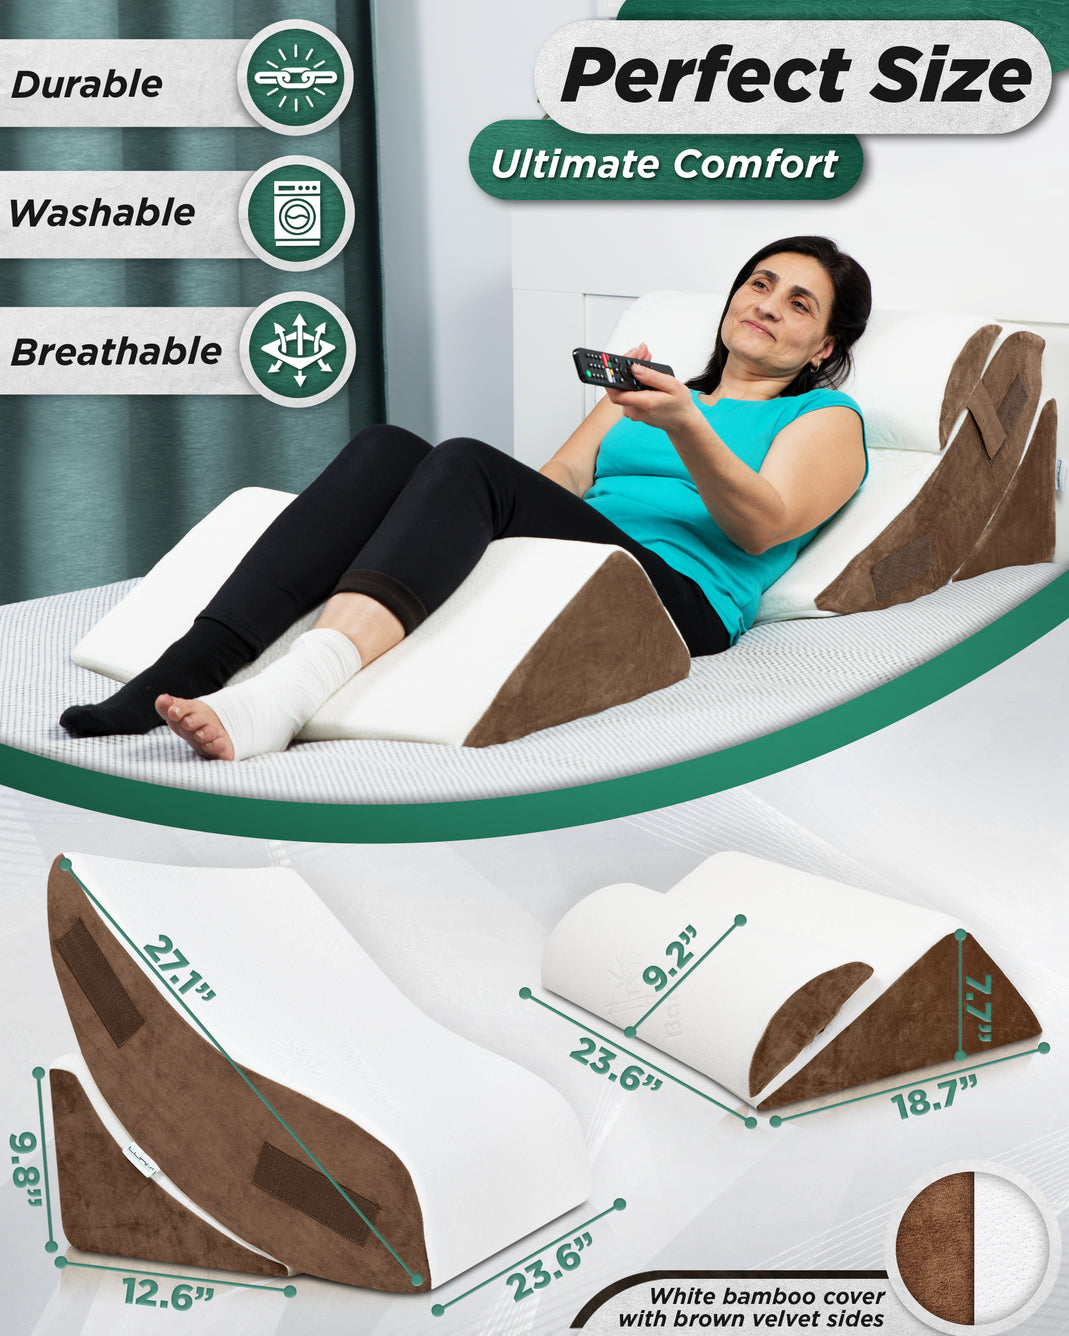 The Hip And Knee Oversized Comfort Pillow